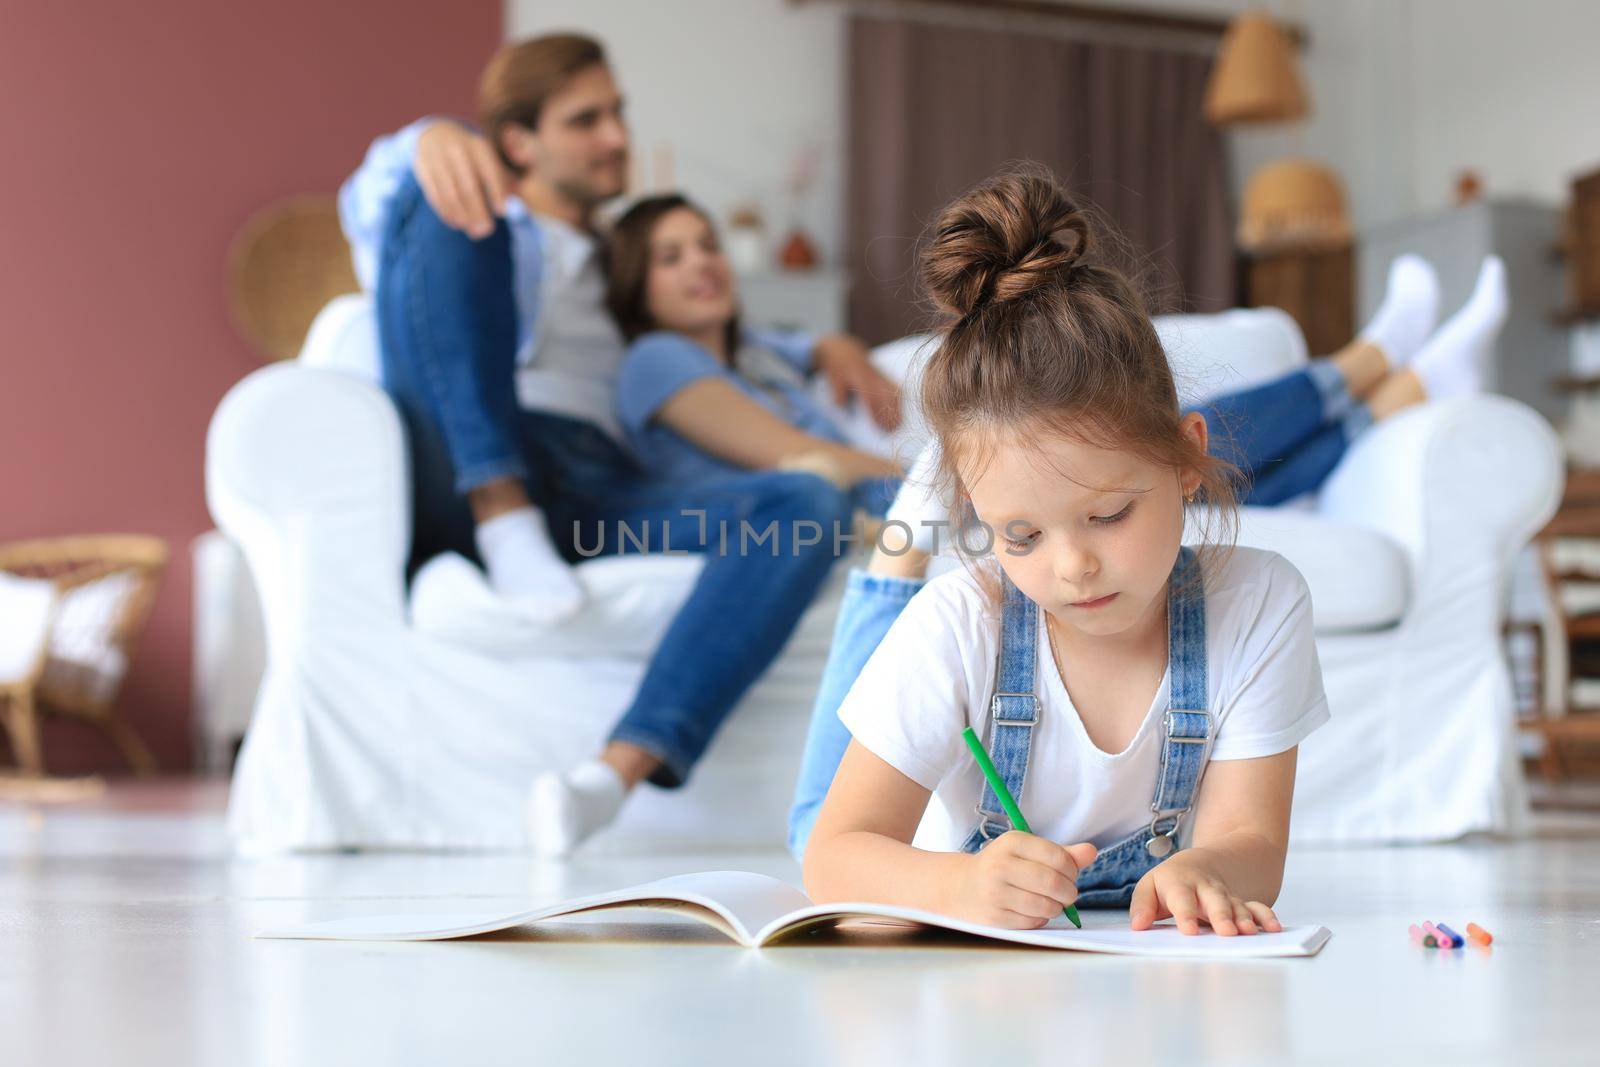 Smiling happy family sit relax on couch in living room watch little daughter drawing in album with colorful pencils. Happy weekends at home